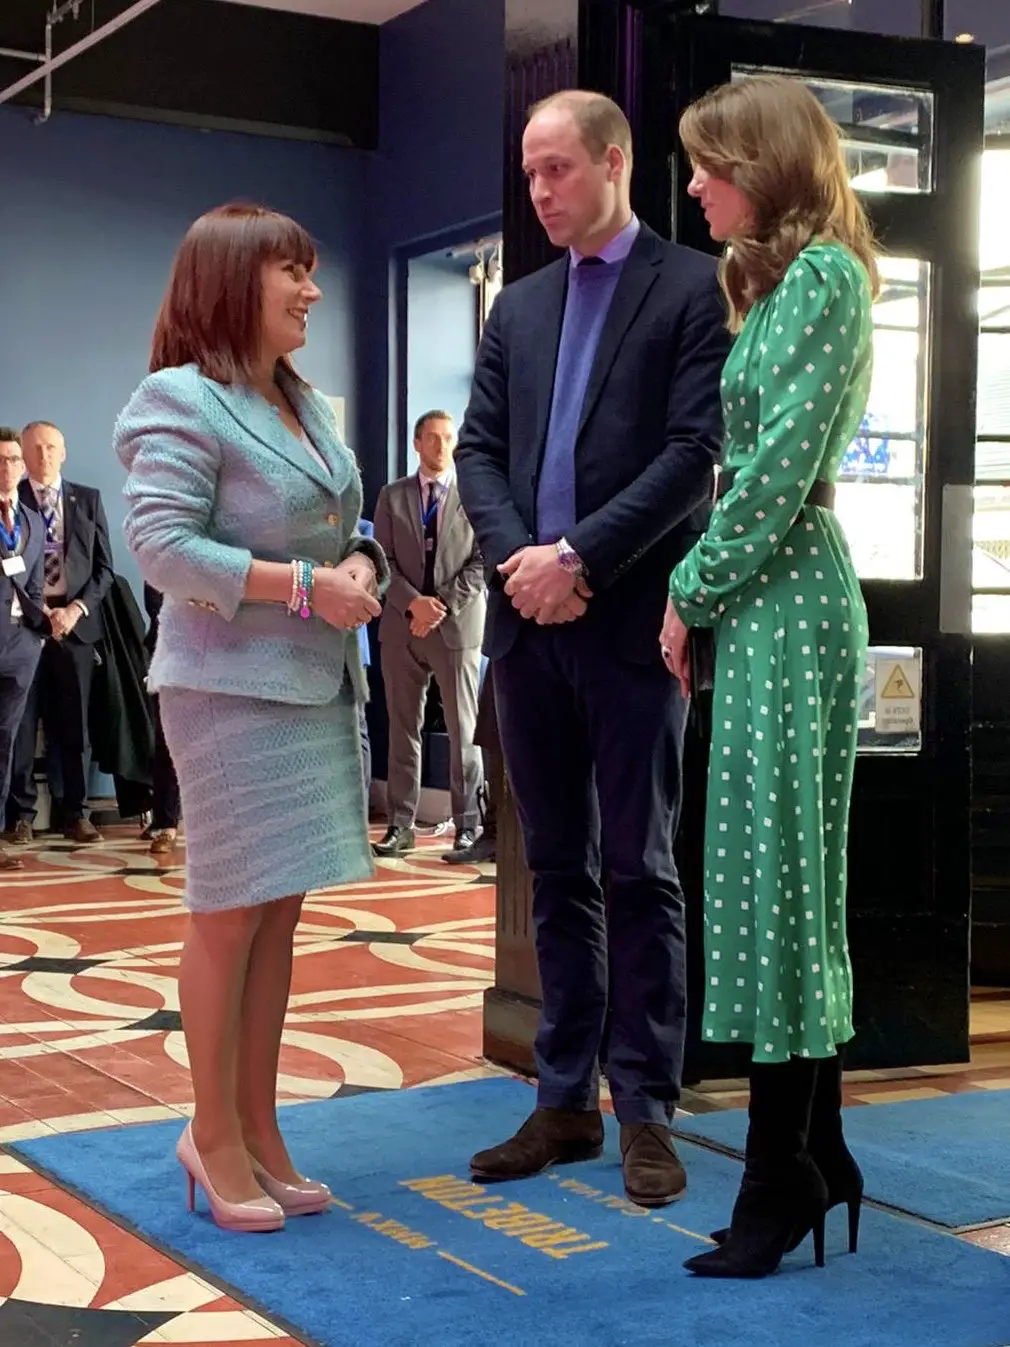 On the third day of the Ireland visit, The Duke and Duchess of Cambridge headed towards the West coast of Ireland.